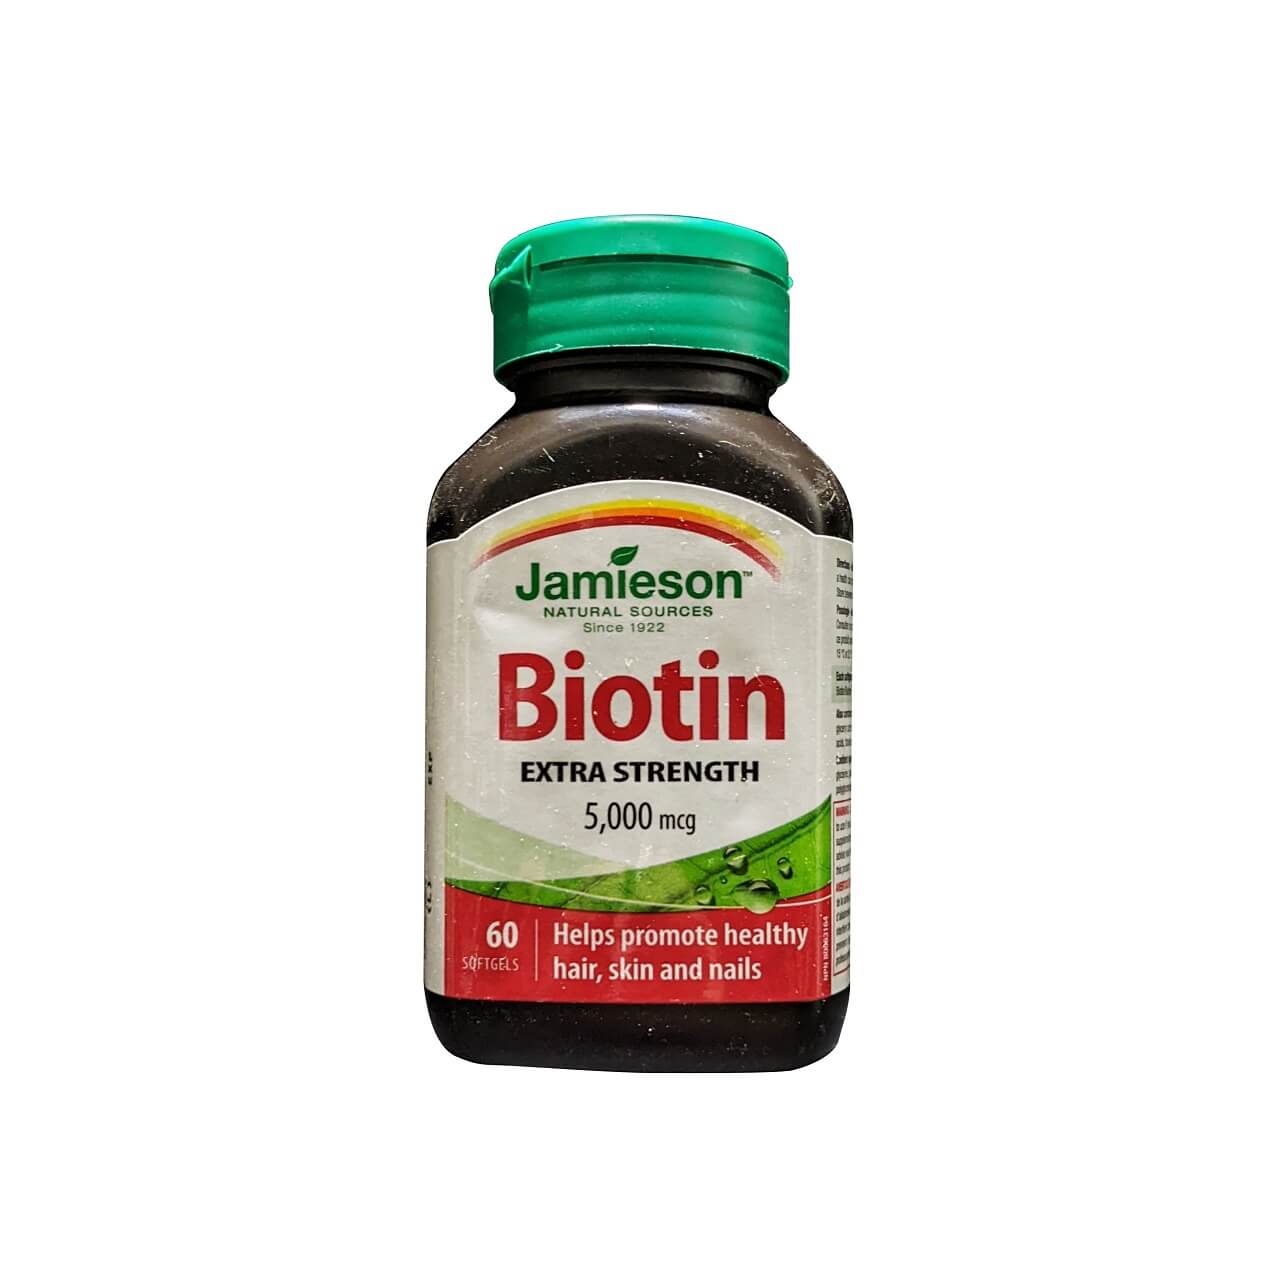 Product label for Jamieson Biotin 5000 mcg Extra Strength (60 softgels) in English